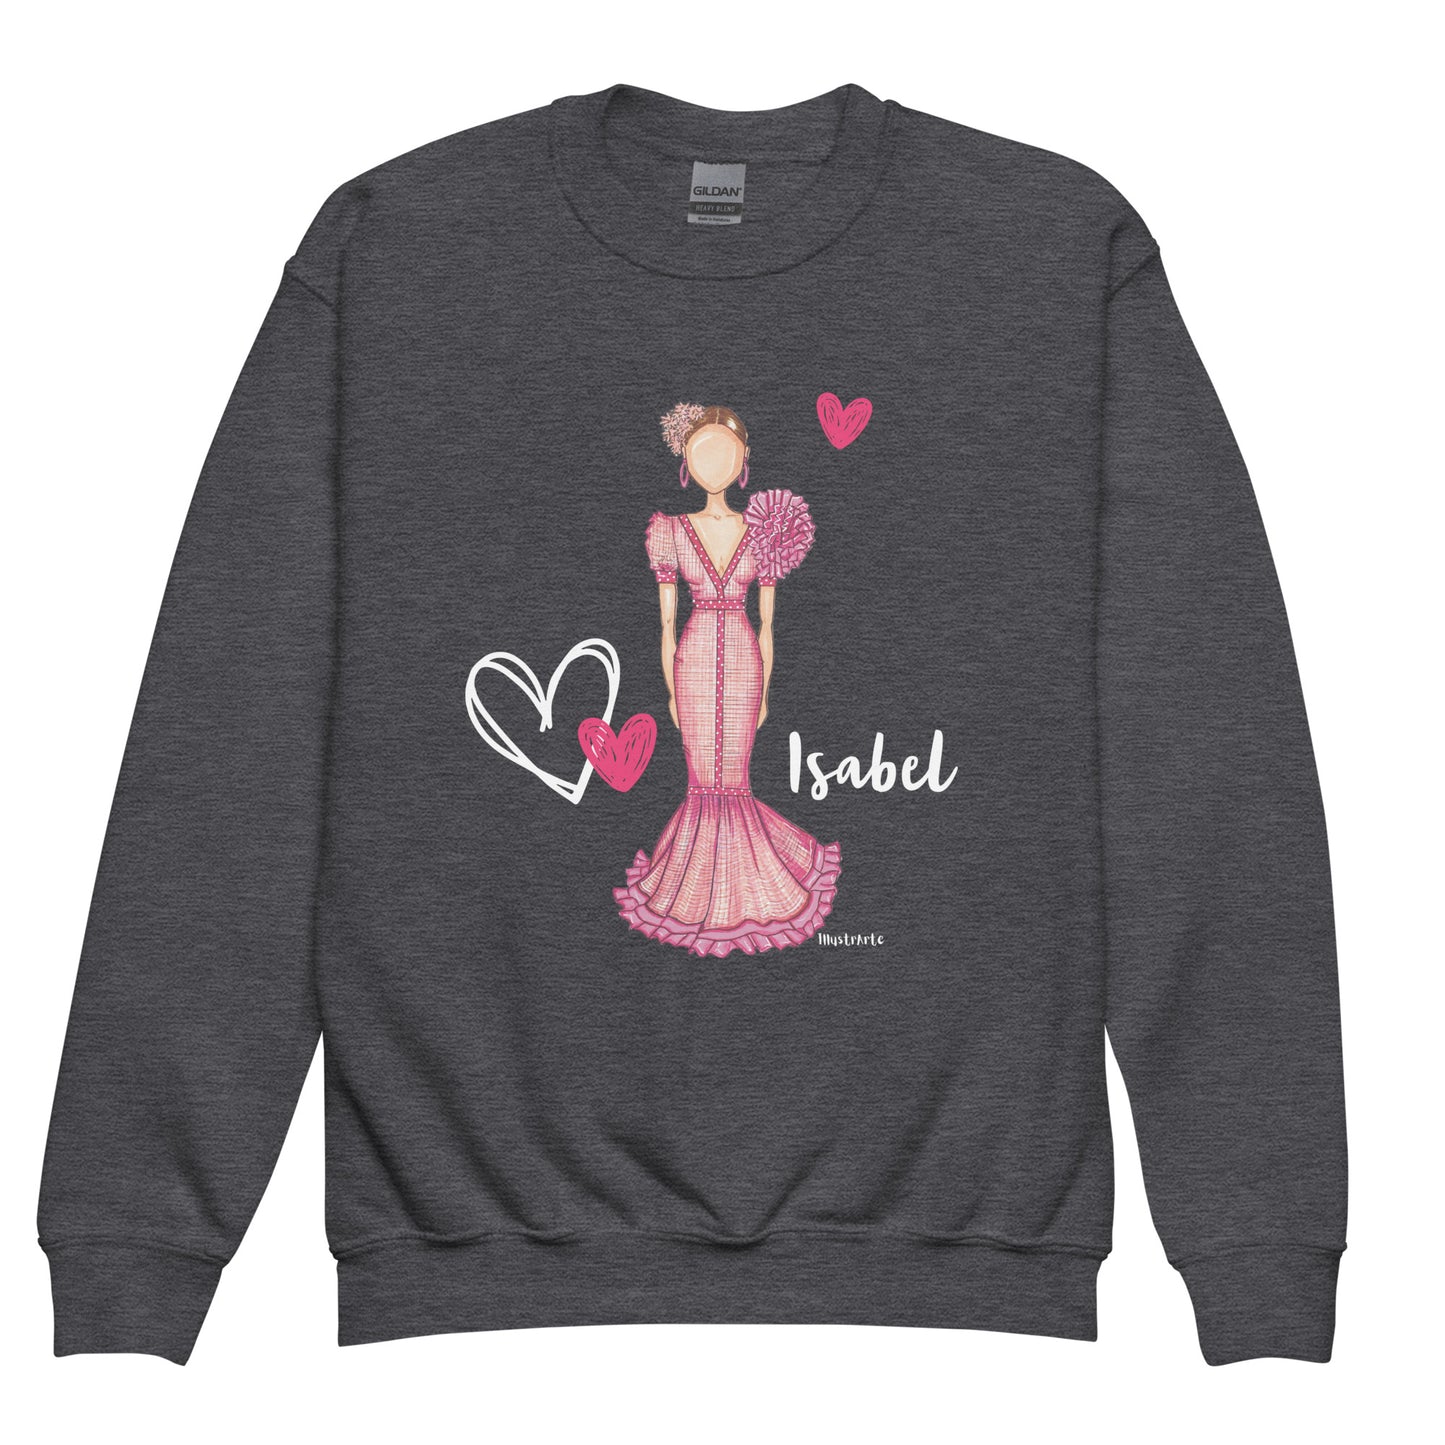 a sweatshirt with a woman in a pink dress